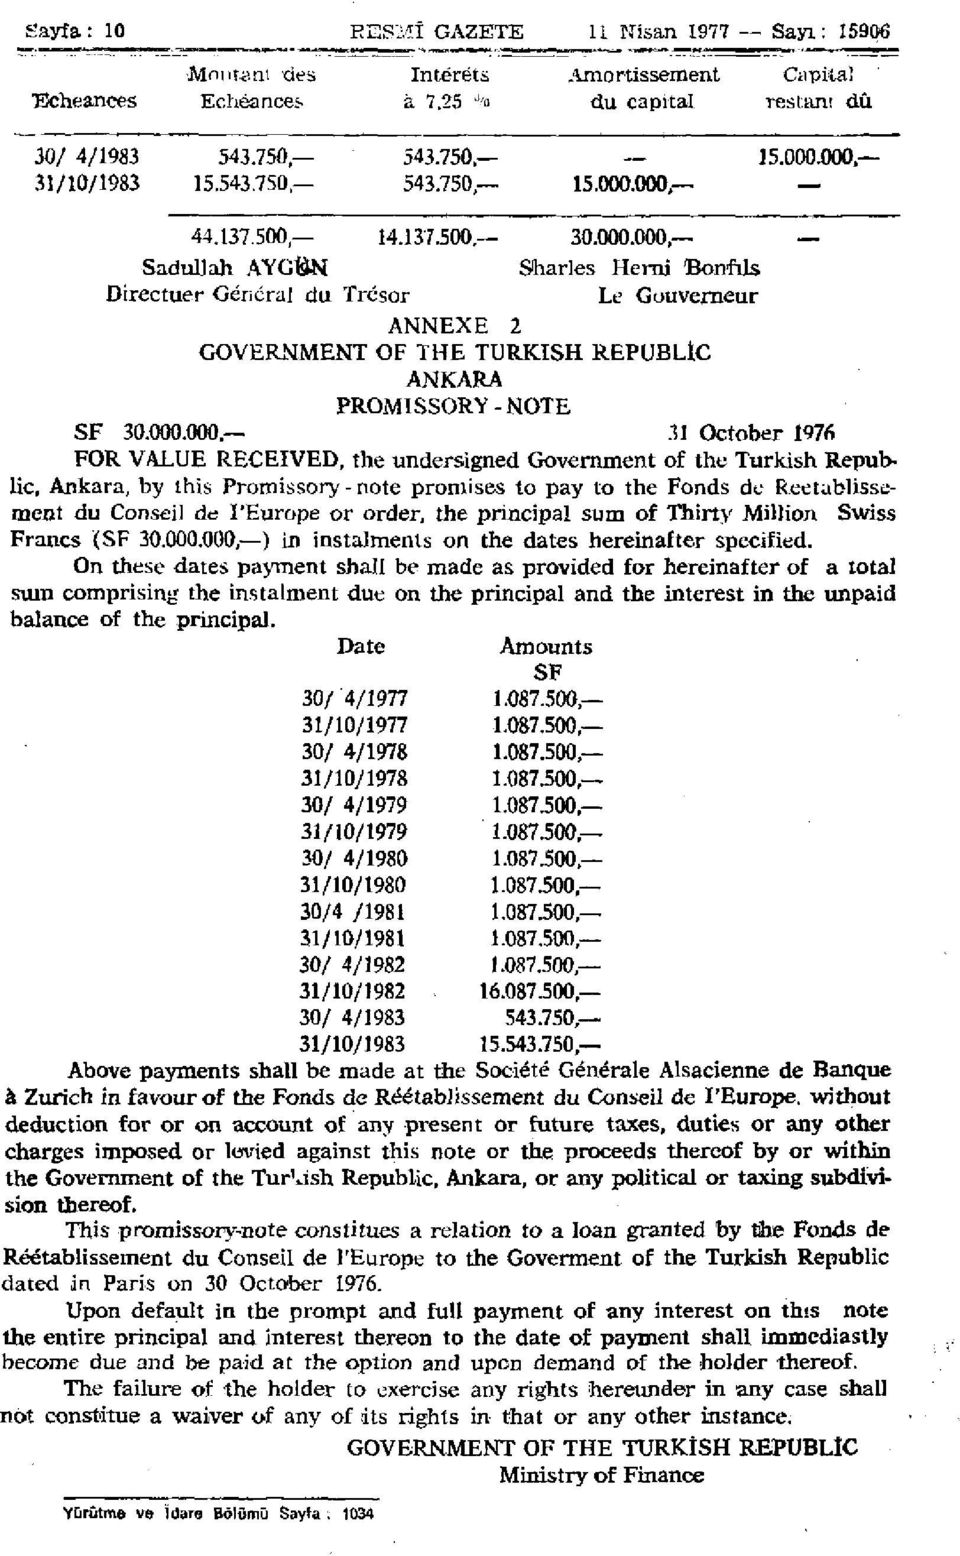 000.000. 31 October 1976 FOR VALUE RECEIVED, the undersigned Government of the Turkish Republic, Ankara, by this Promissory - note promises to pay to the Fonds de Reetablissement du Conseil de